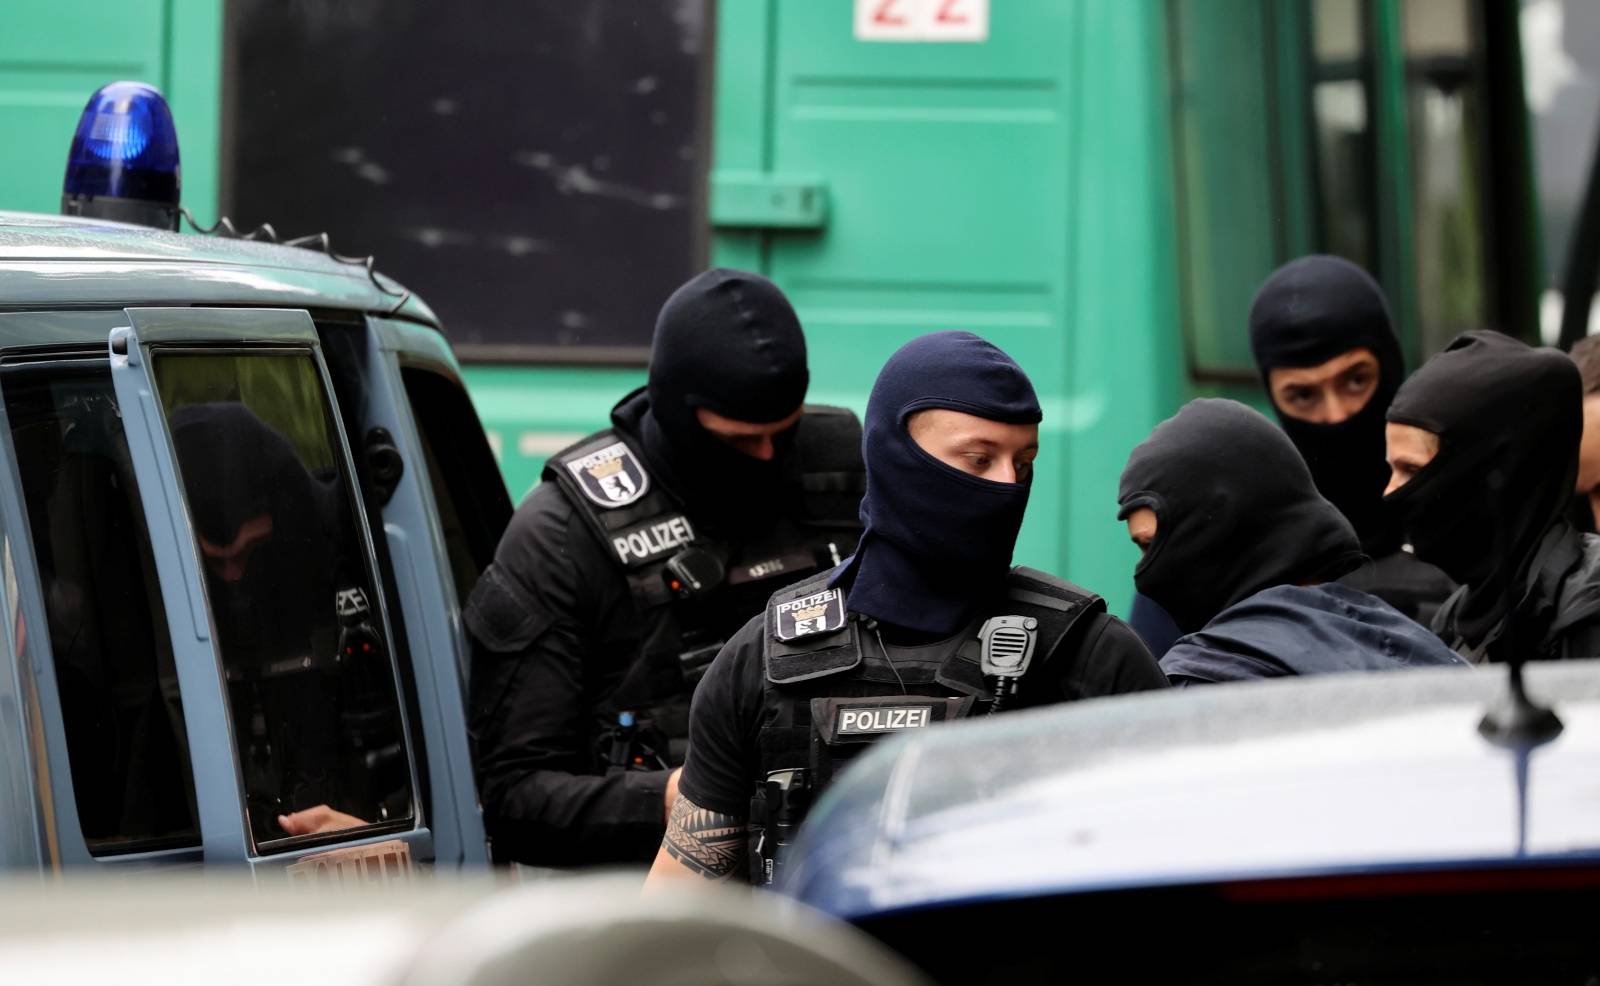 Police officers gather outside during a raid in an apartment building at Kreuzberg district in Berlin